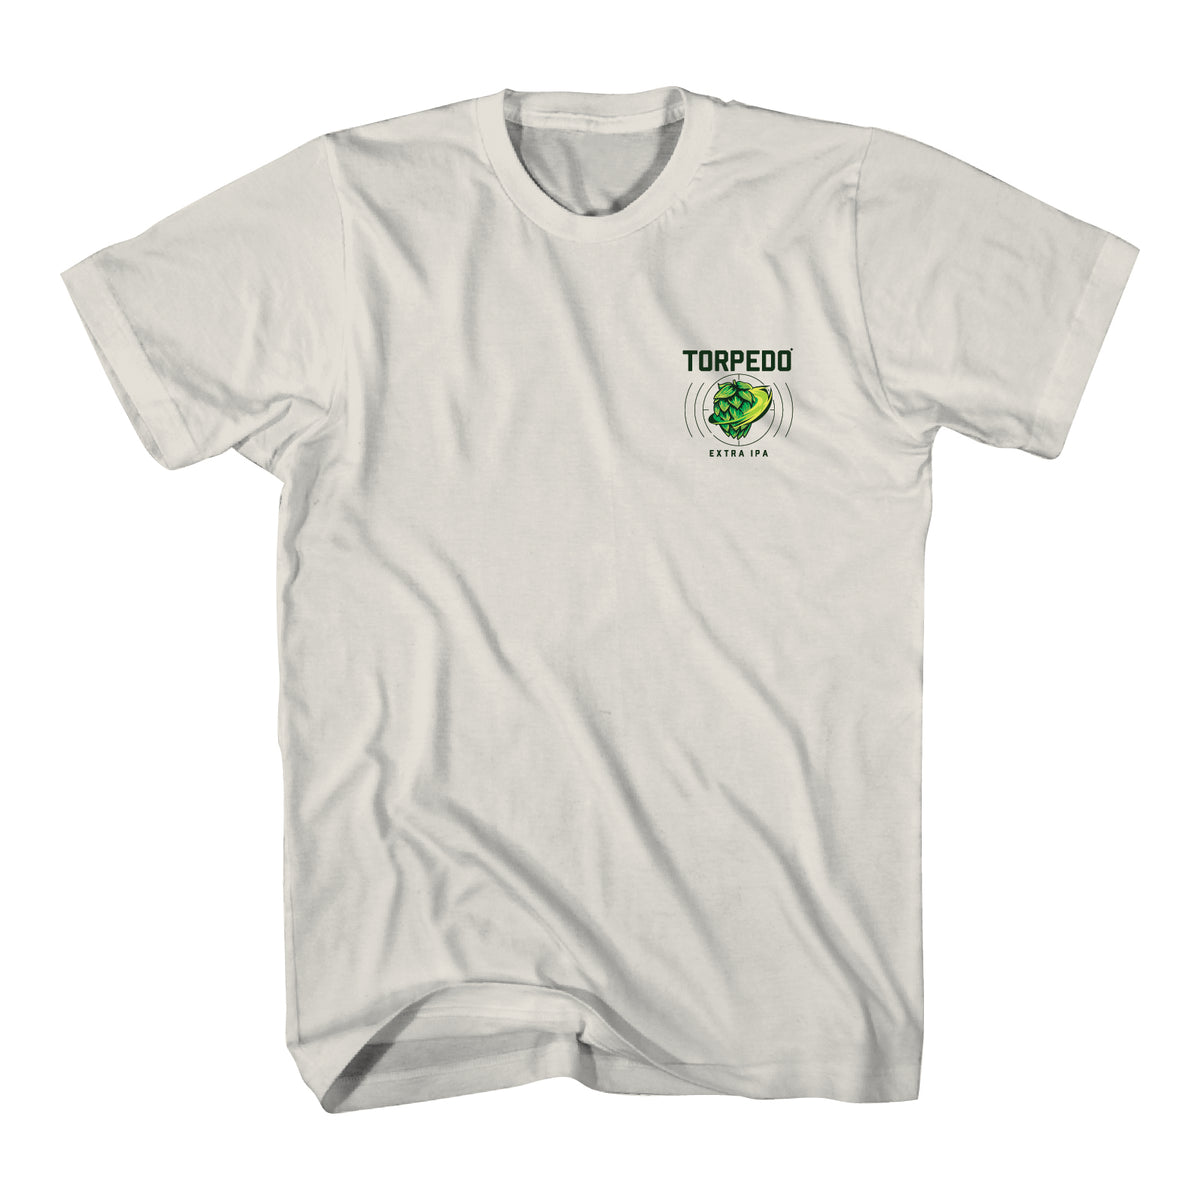 Sierra Nevada Brewing Co. Torpedo Extra IPA T-Shirt - front view